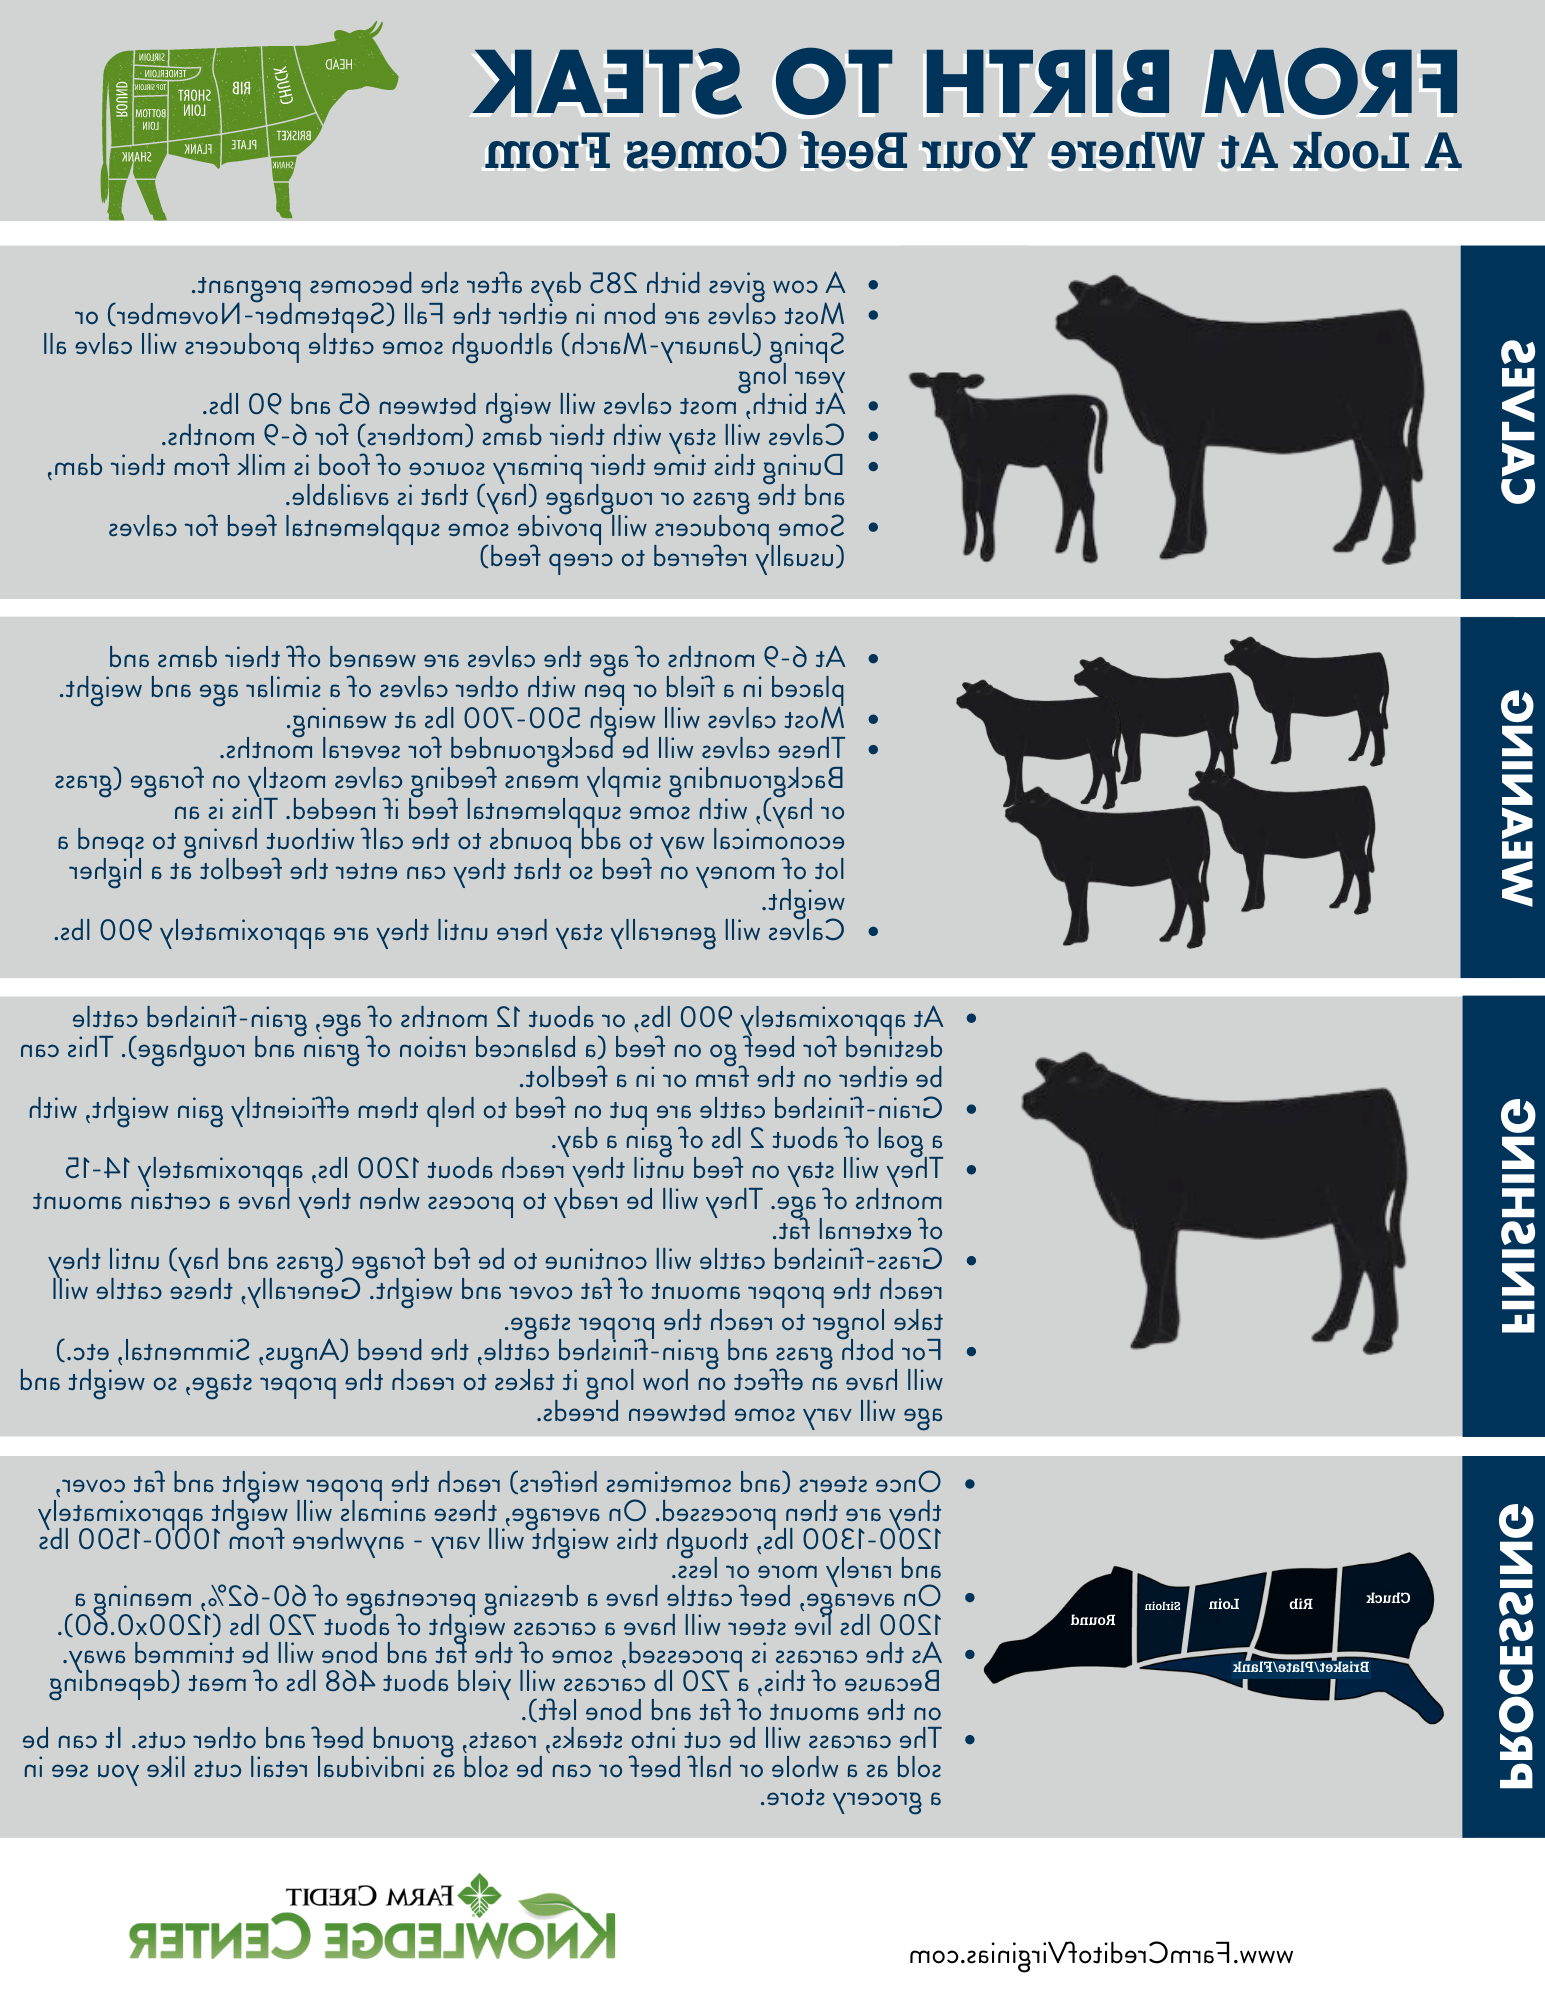 From birth to steak cattle lifecycle